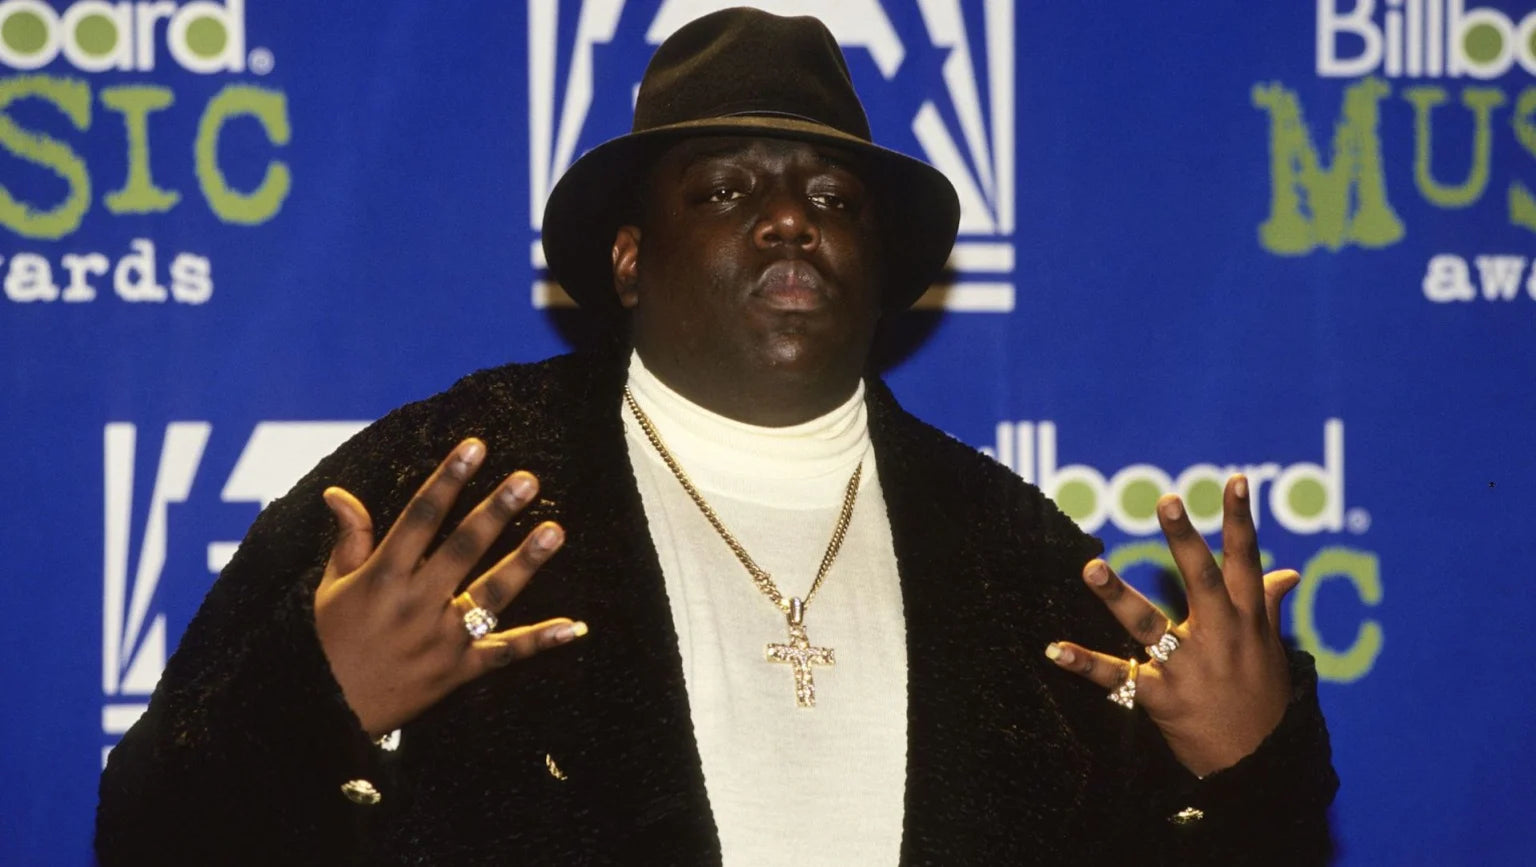 The Notorious B.I.G.’s Estate Shares new Song “G.O.A.T.” f/ Ty Dolla Sign